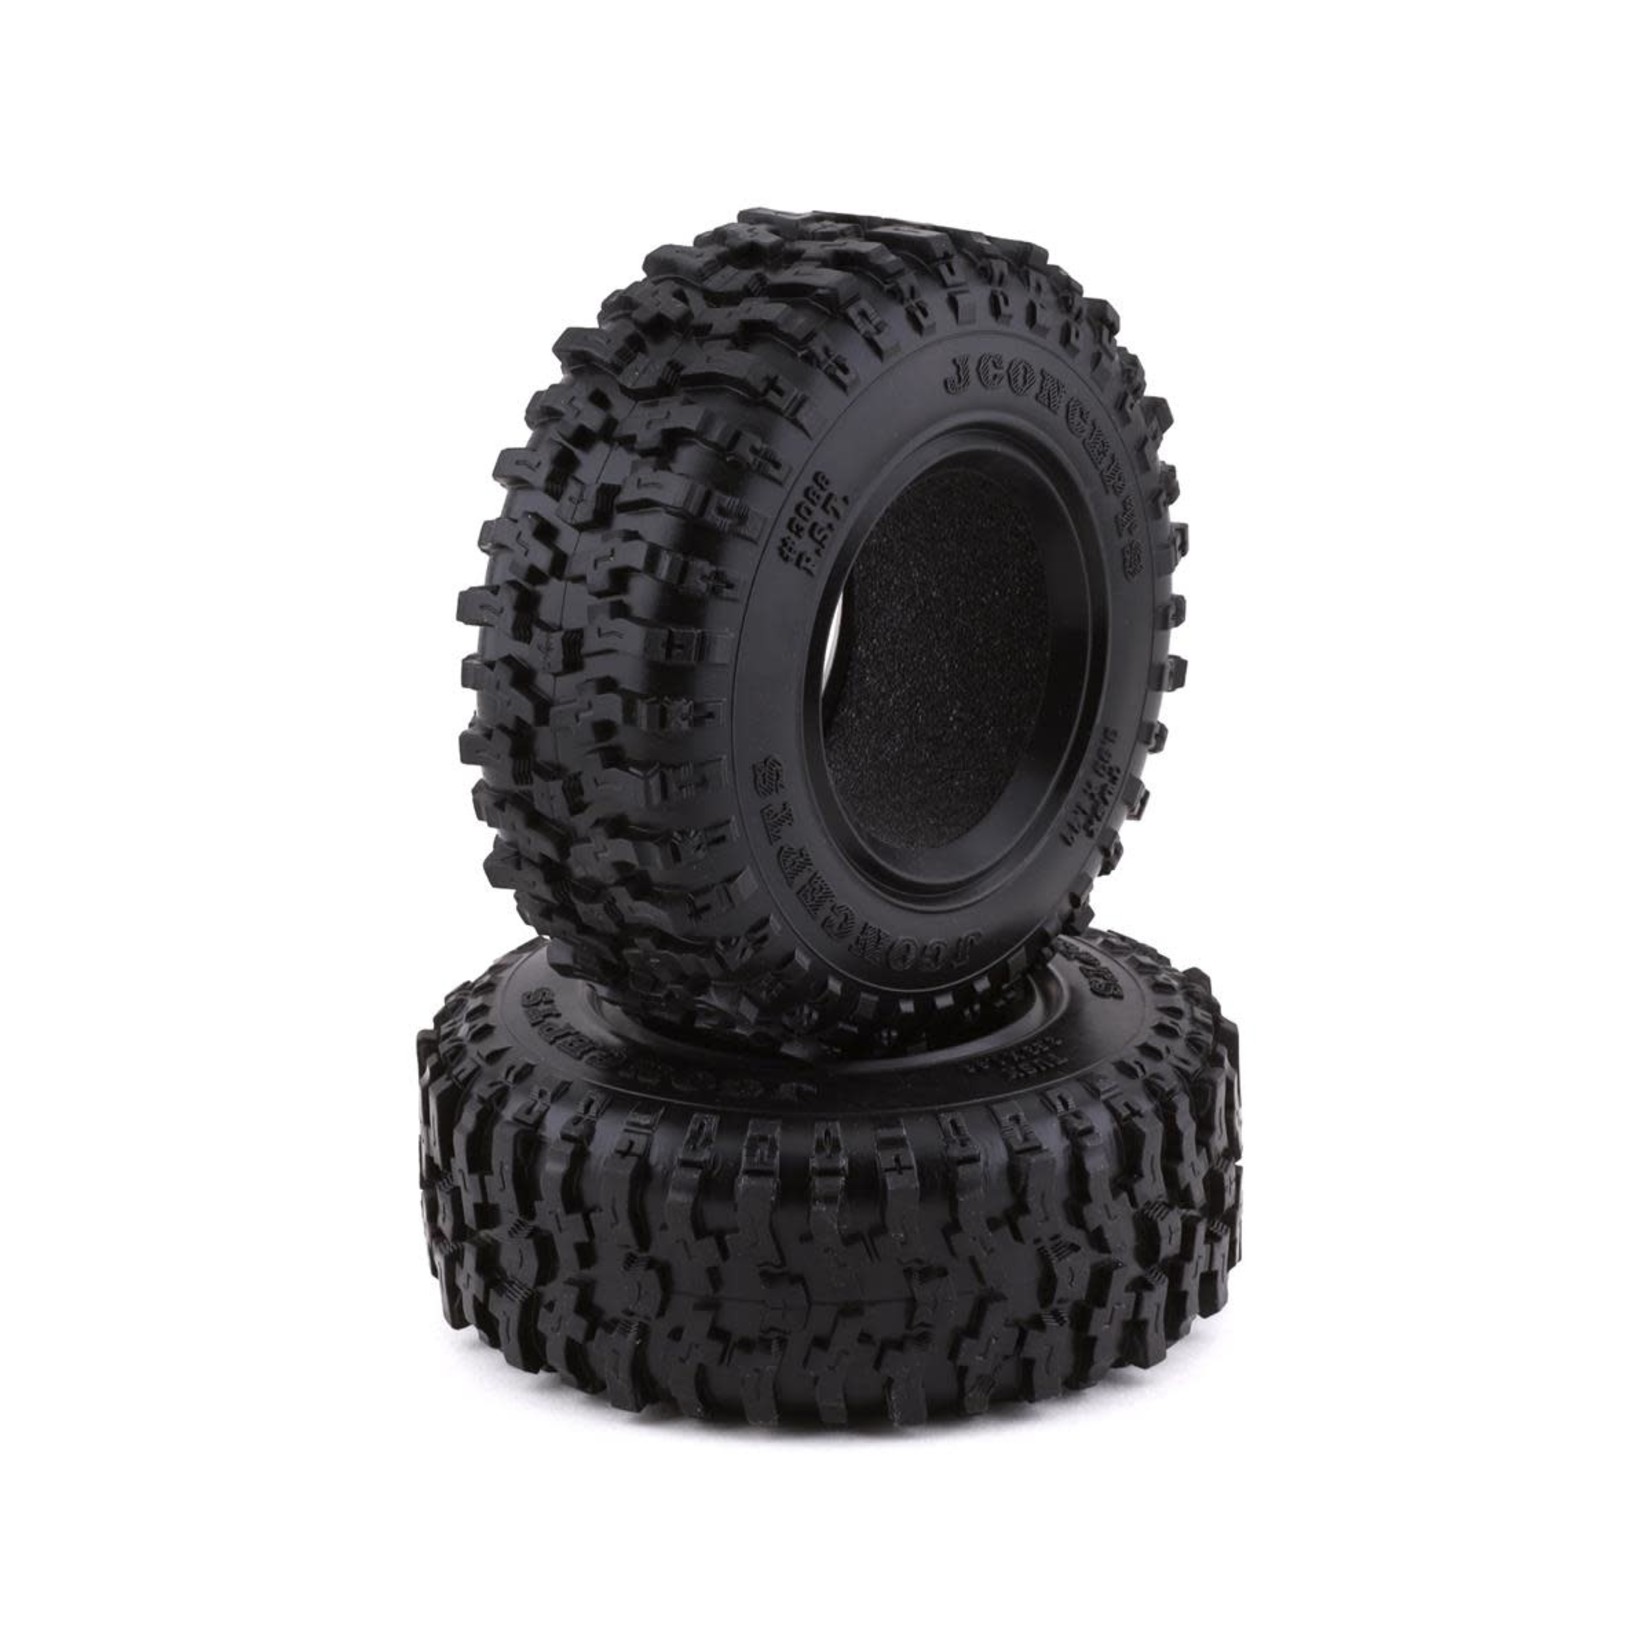 JConcepts JConcepts Tusk Scale Country 1.9" Class 1 Crawler Tires (3.93") (Green) #3088-02